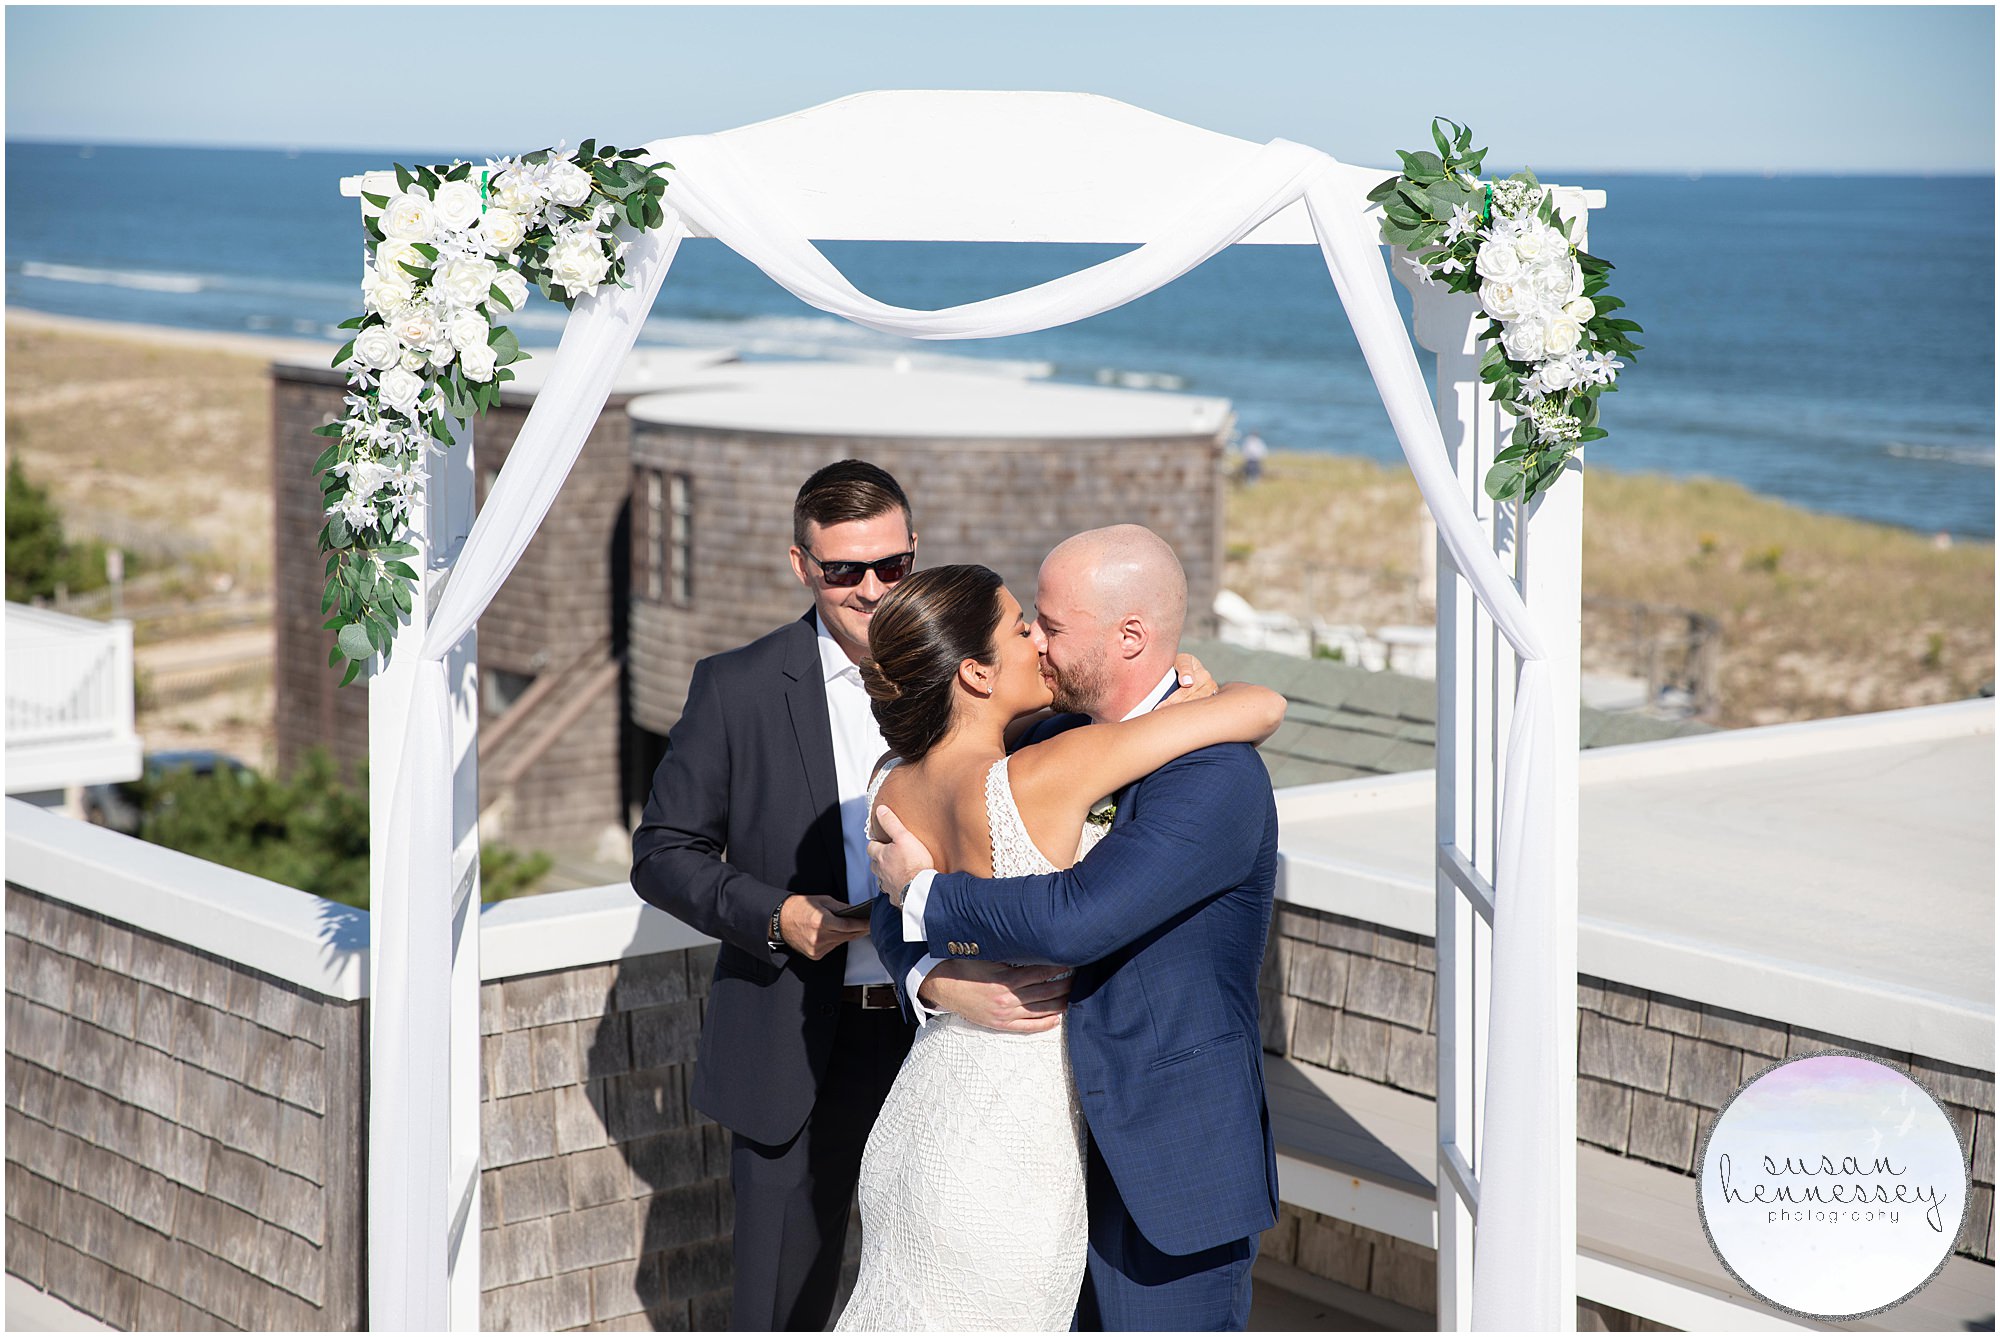 Roof deck ceremony at Long Beach Island Microwedding